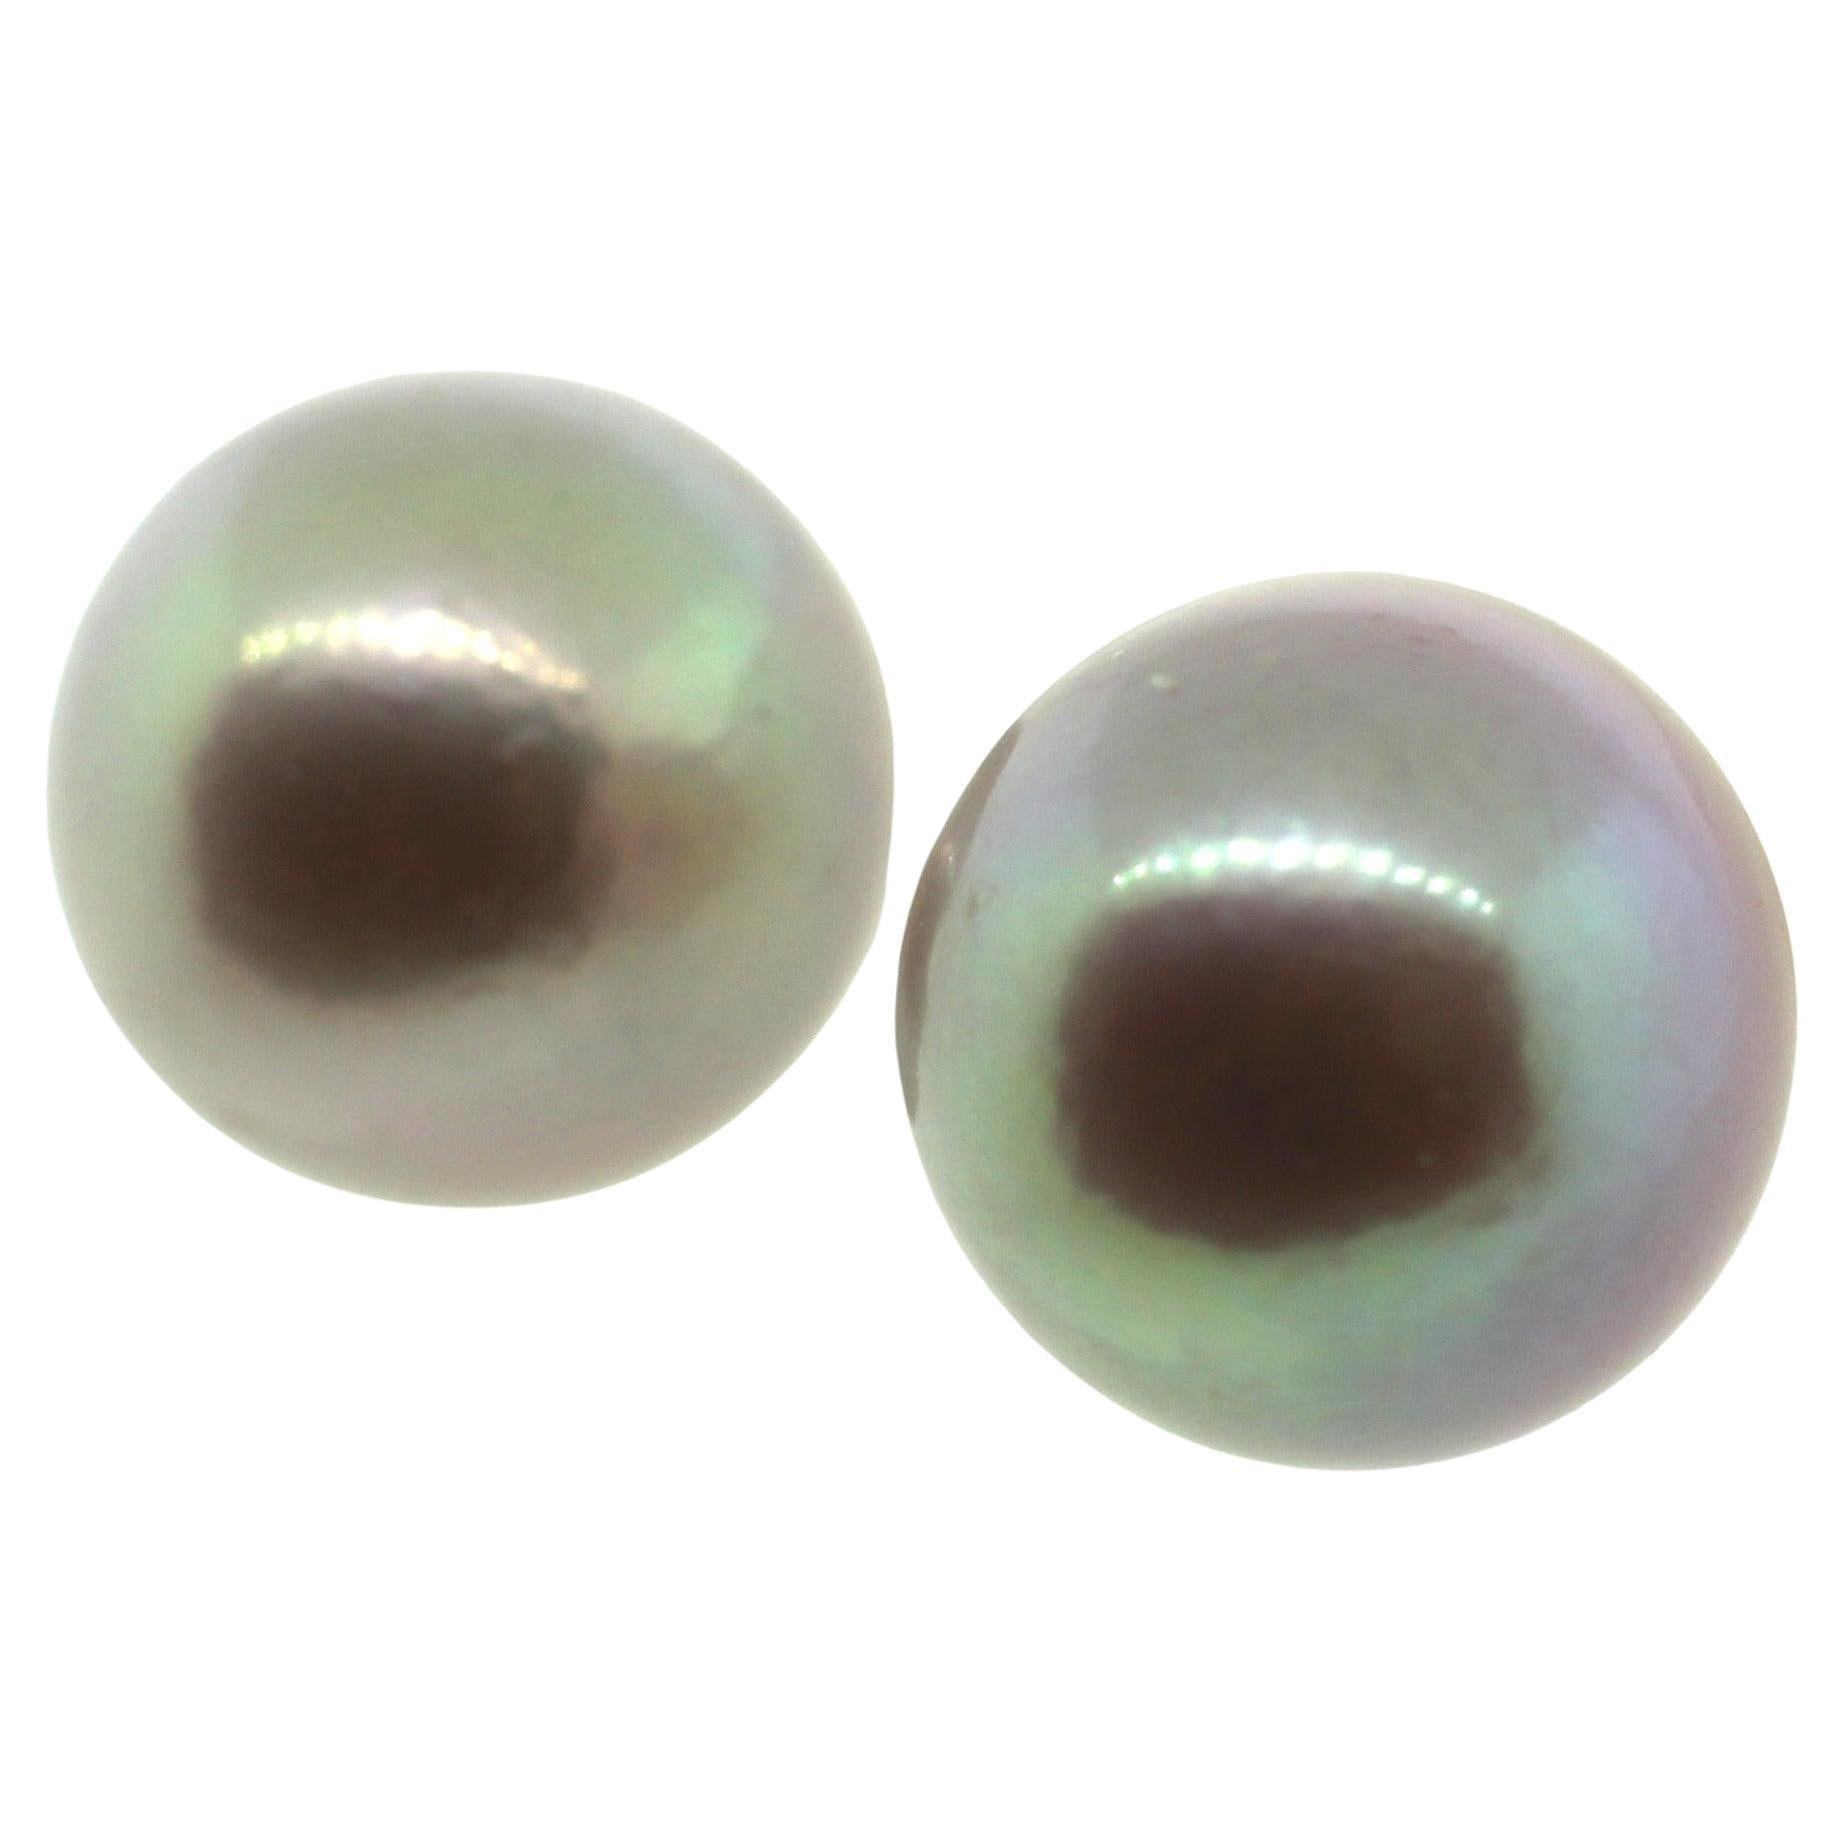 Hakimoto By Jewel Of Ocean
18K White Gold 
Natural Color Cultured Pearl Earrings.
Total item weight 4.1 grams
11 mm Natural color Cultured Pearls
18K White Gold High Polish
Orient: Very Good
Luster: Very Good
Nacre: Very Good